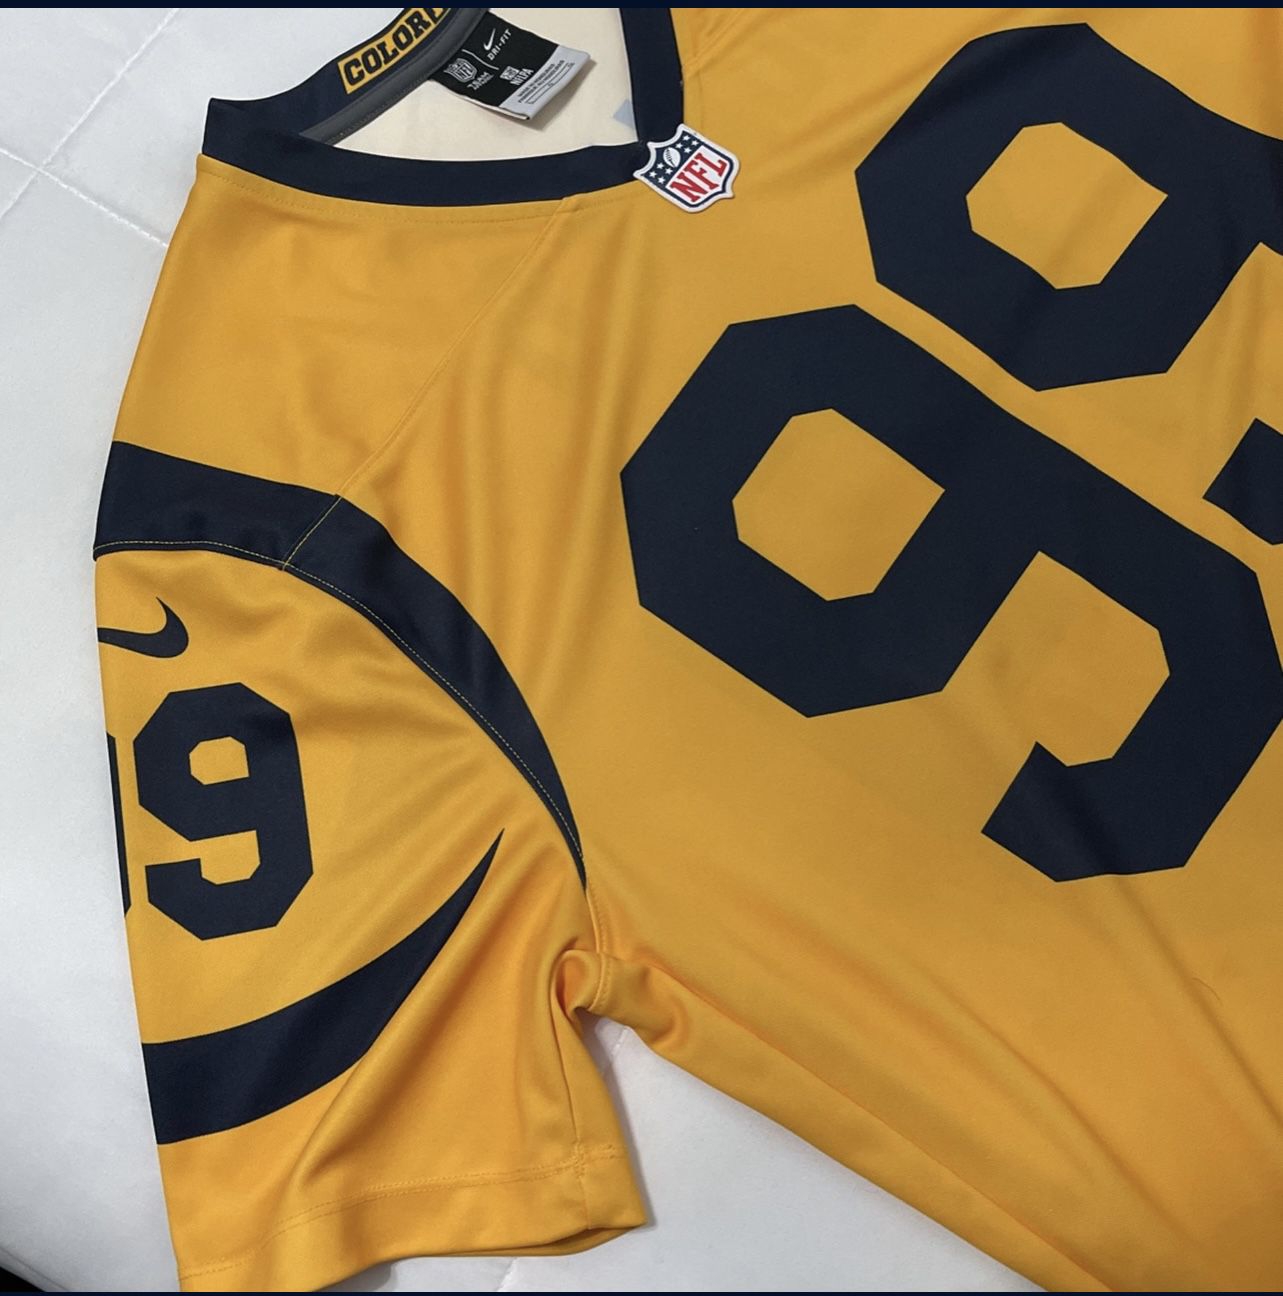 Aaron Donald Jersey for Sale in Arcadia, CA - OfferUp